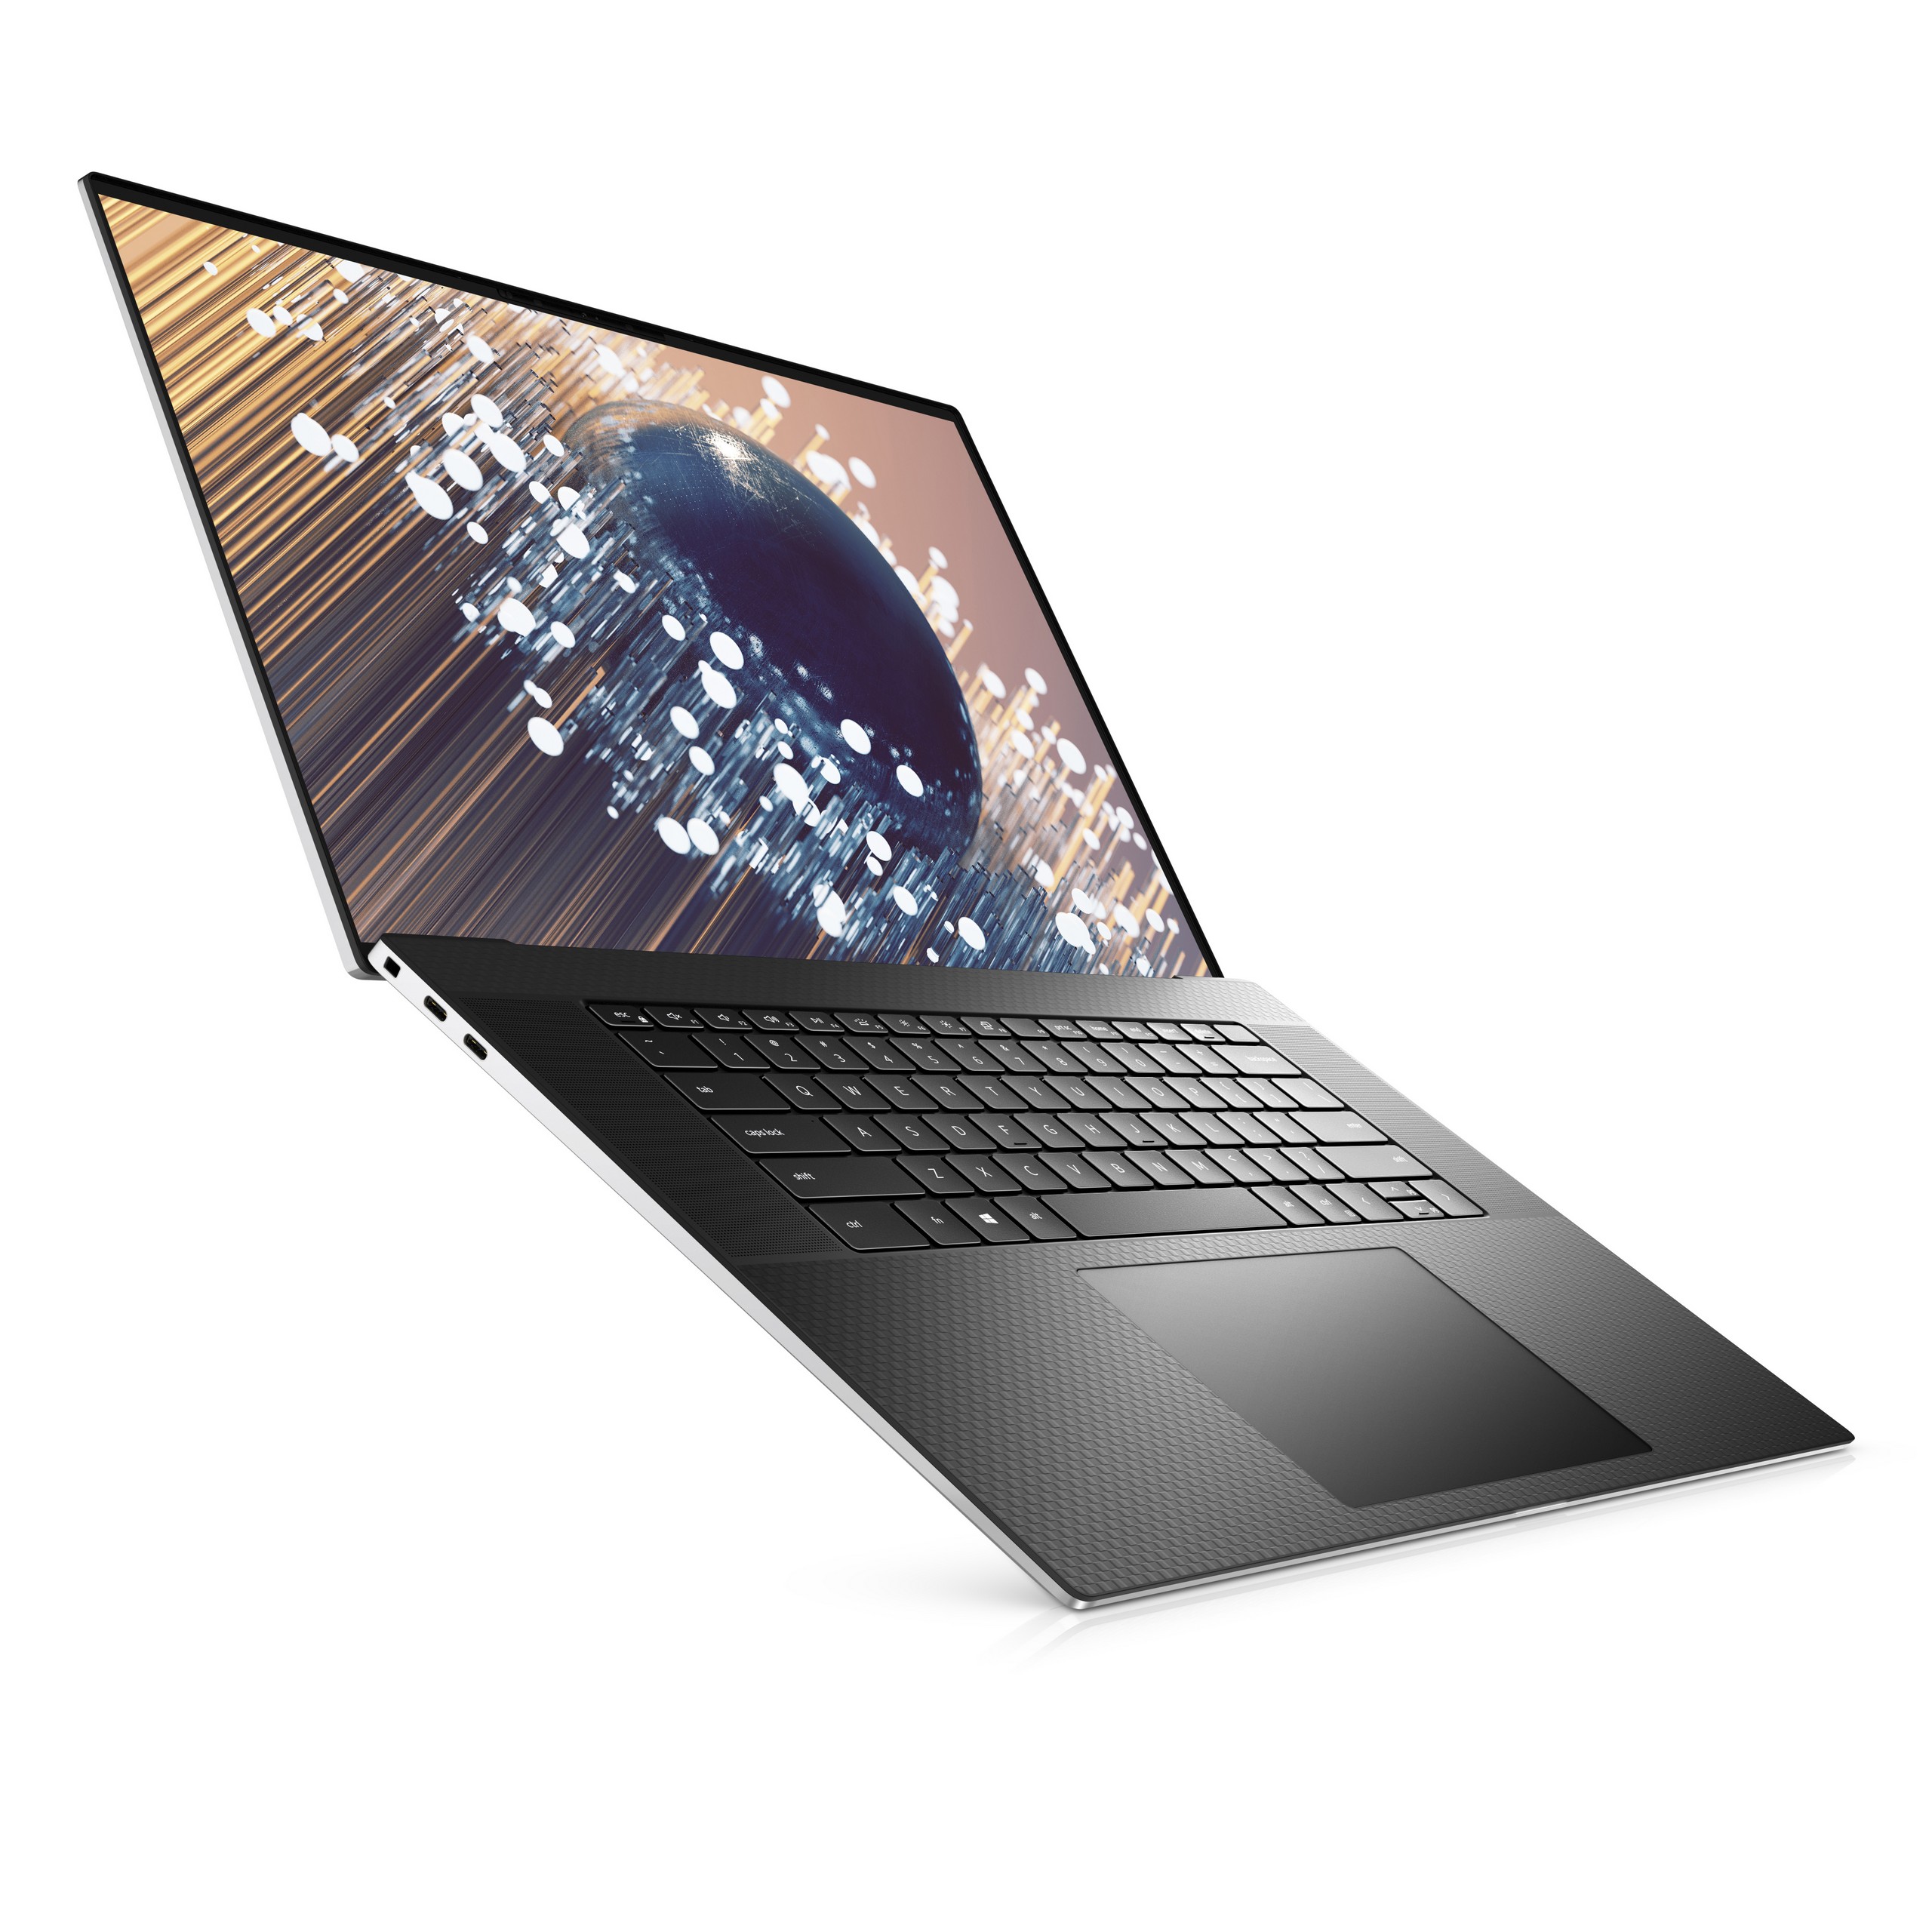 https://laptopxachtay.com.vn/Images/Products/40286_40241_40148_40121_39896_dell-xps-15-9500-i9-10885h-32gb-1tb-ssd-gtx1650ti-4gb-15-6-fhd-win-10-pro_39587_3.jpg